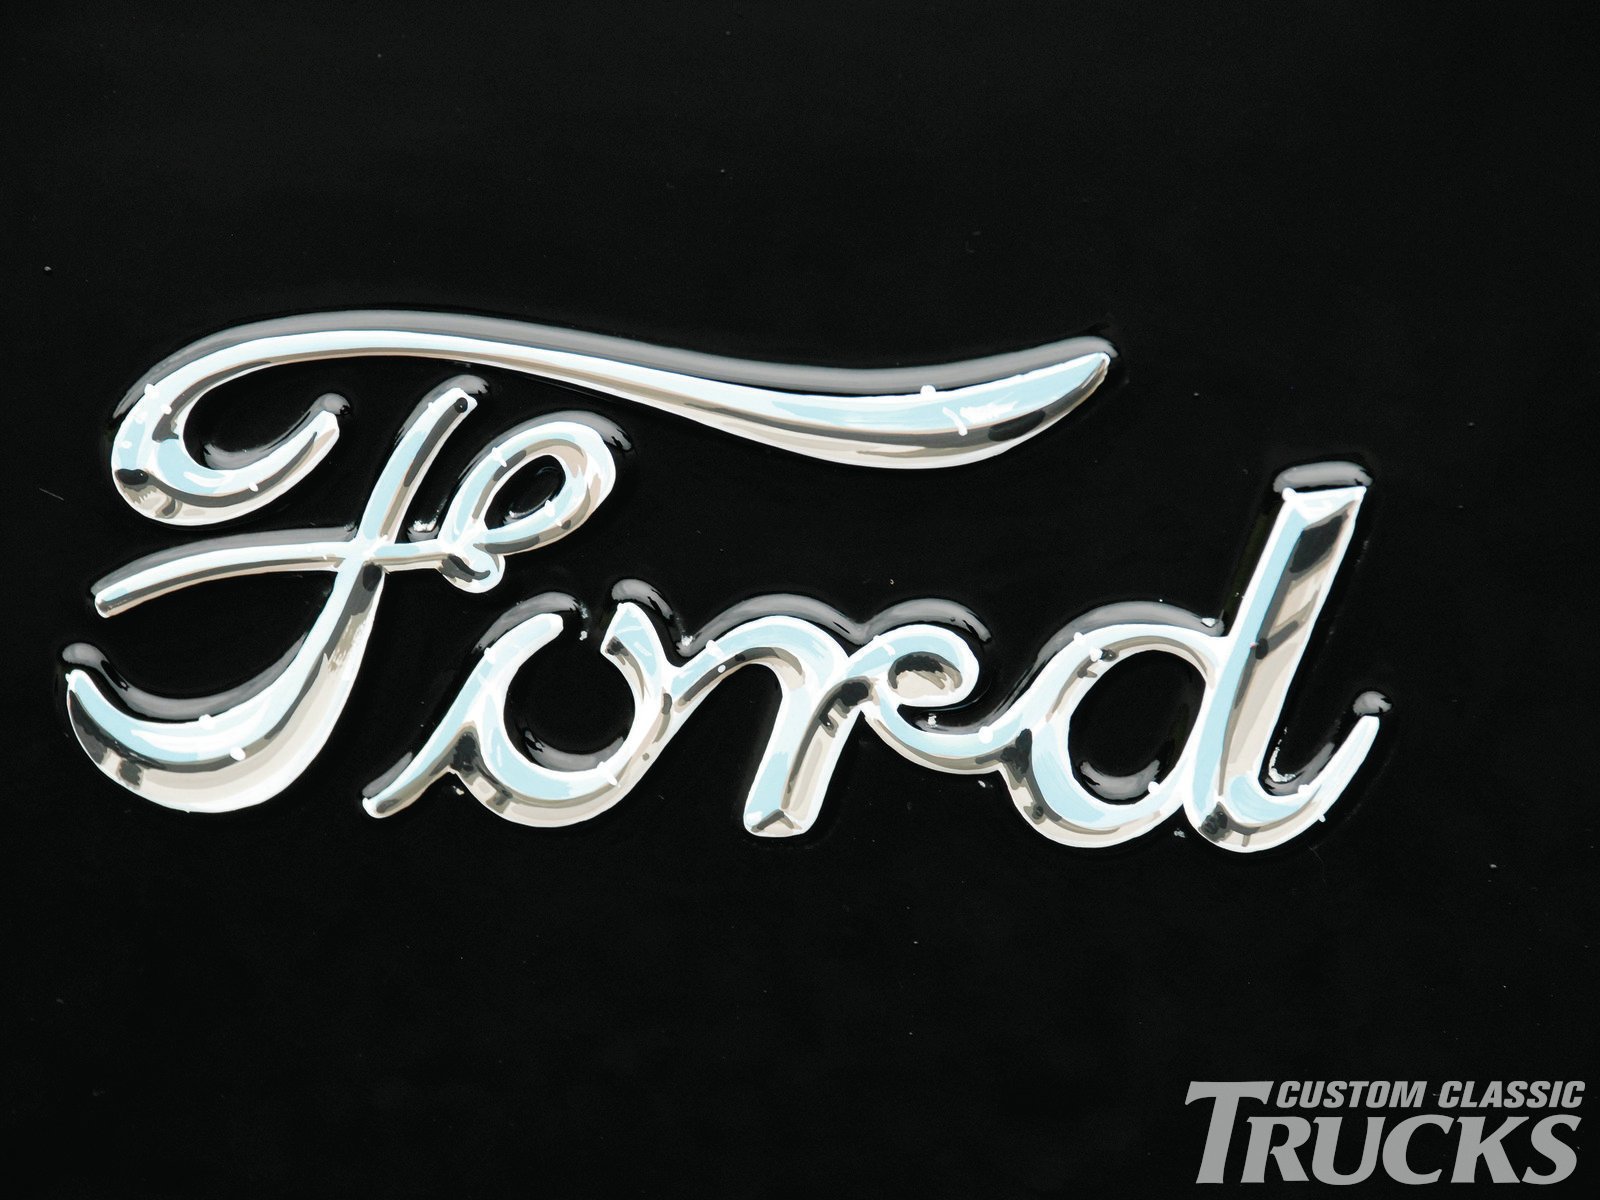  ford logos badass ford logos cool ford wallpapers ford logo vector 1600x1200